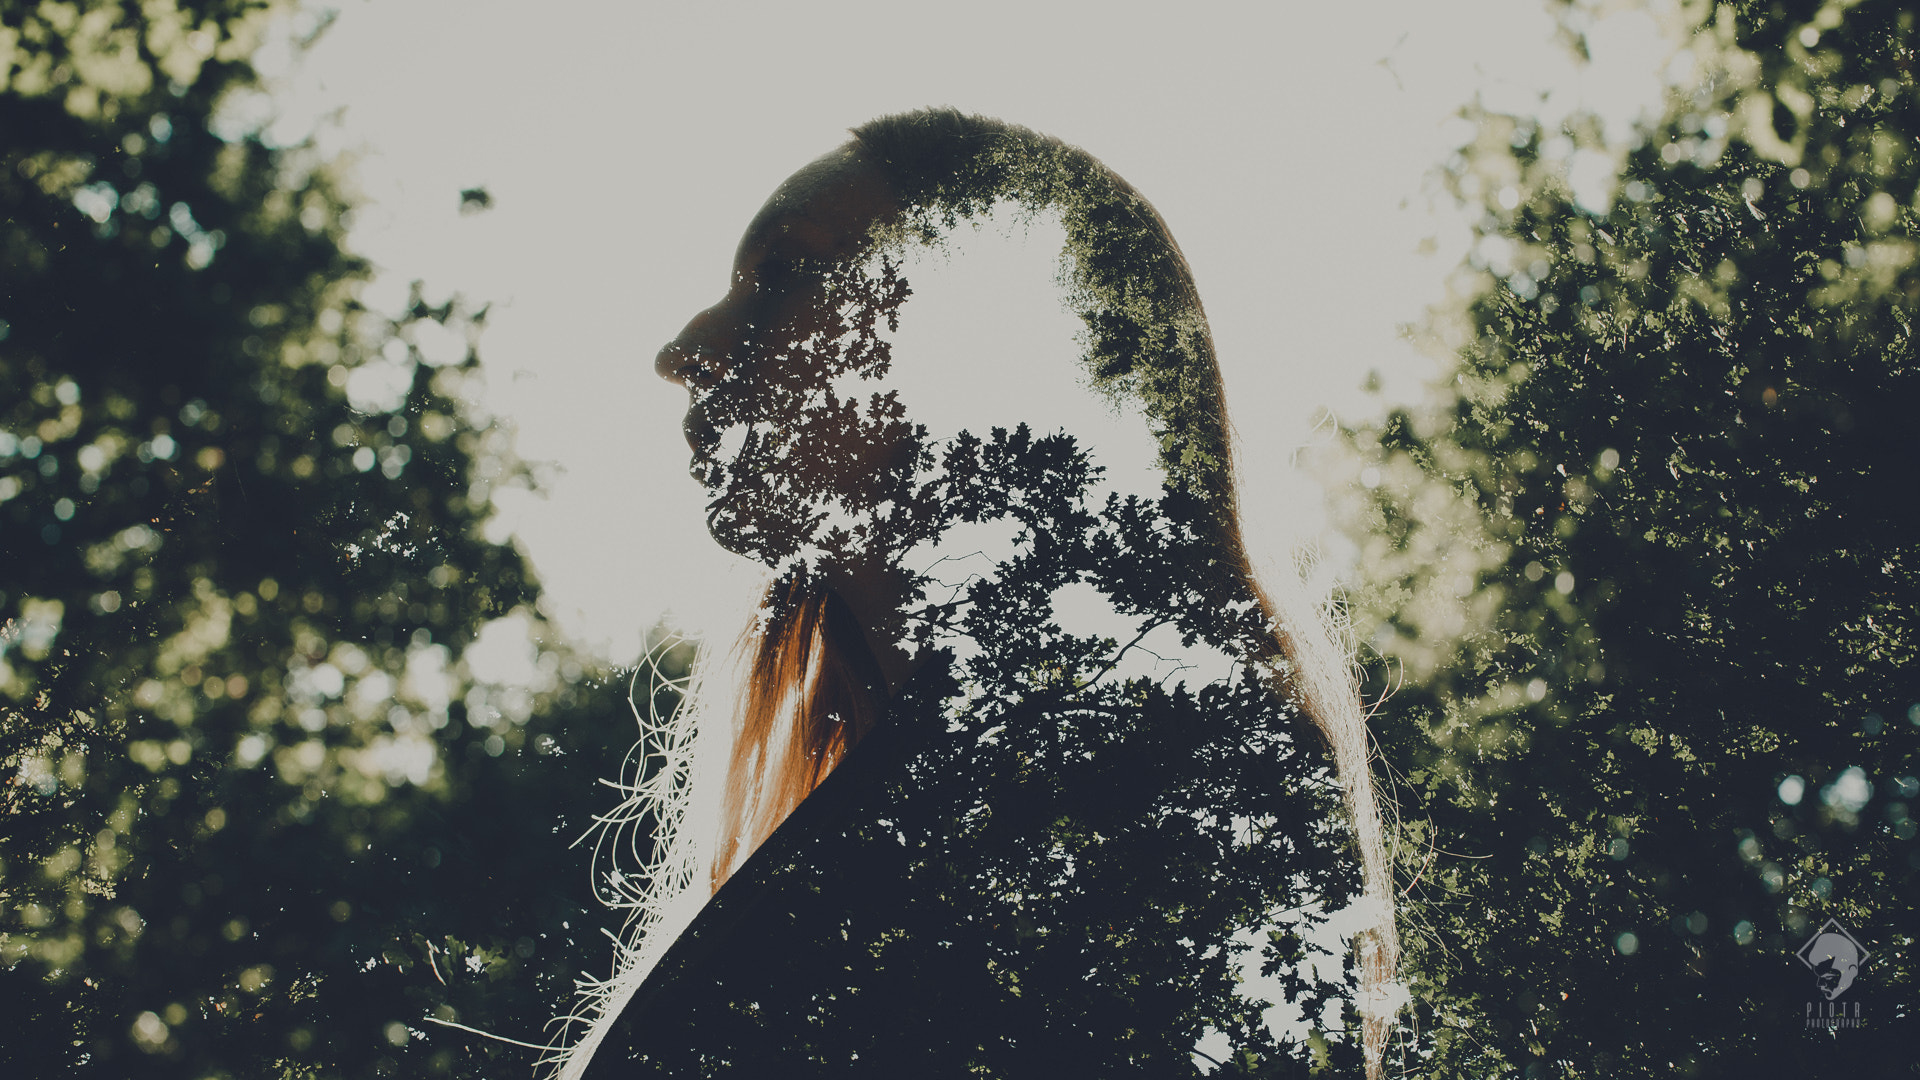 How to create surreal double-exposure photos